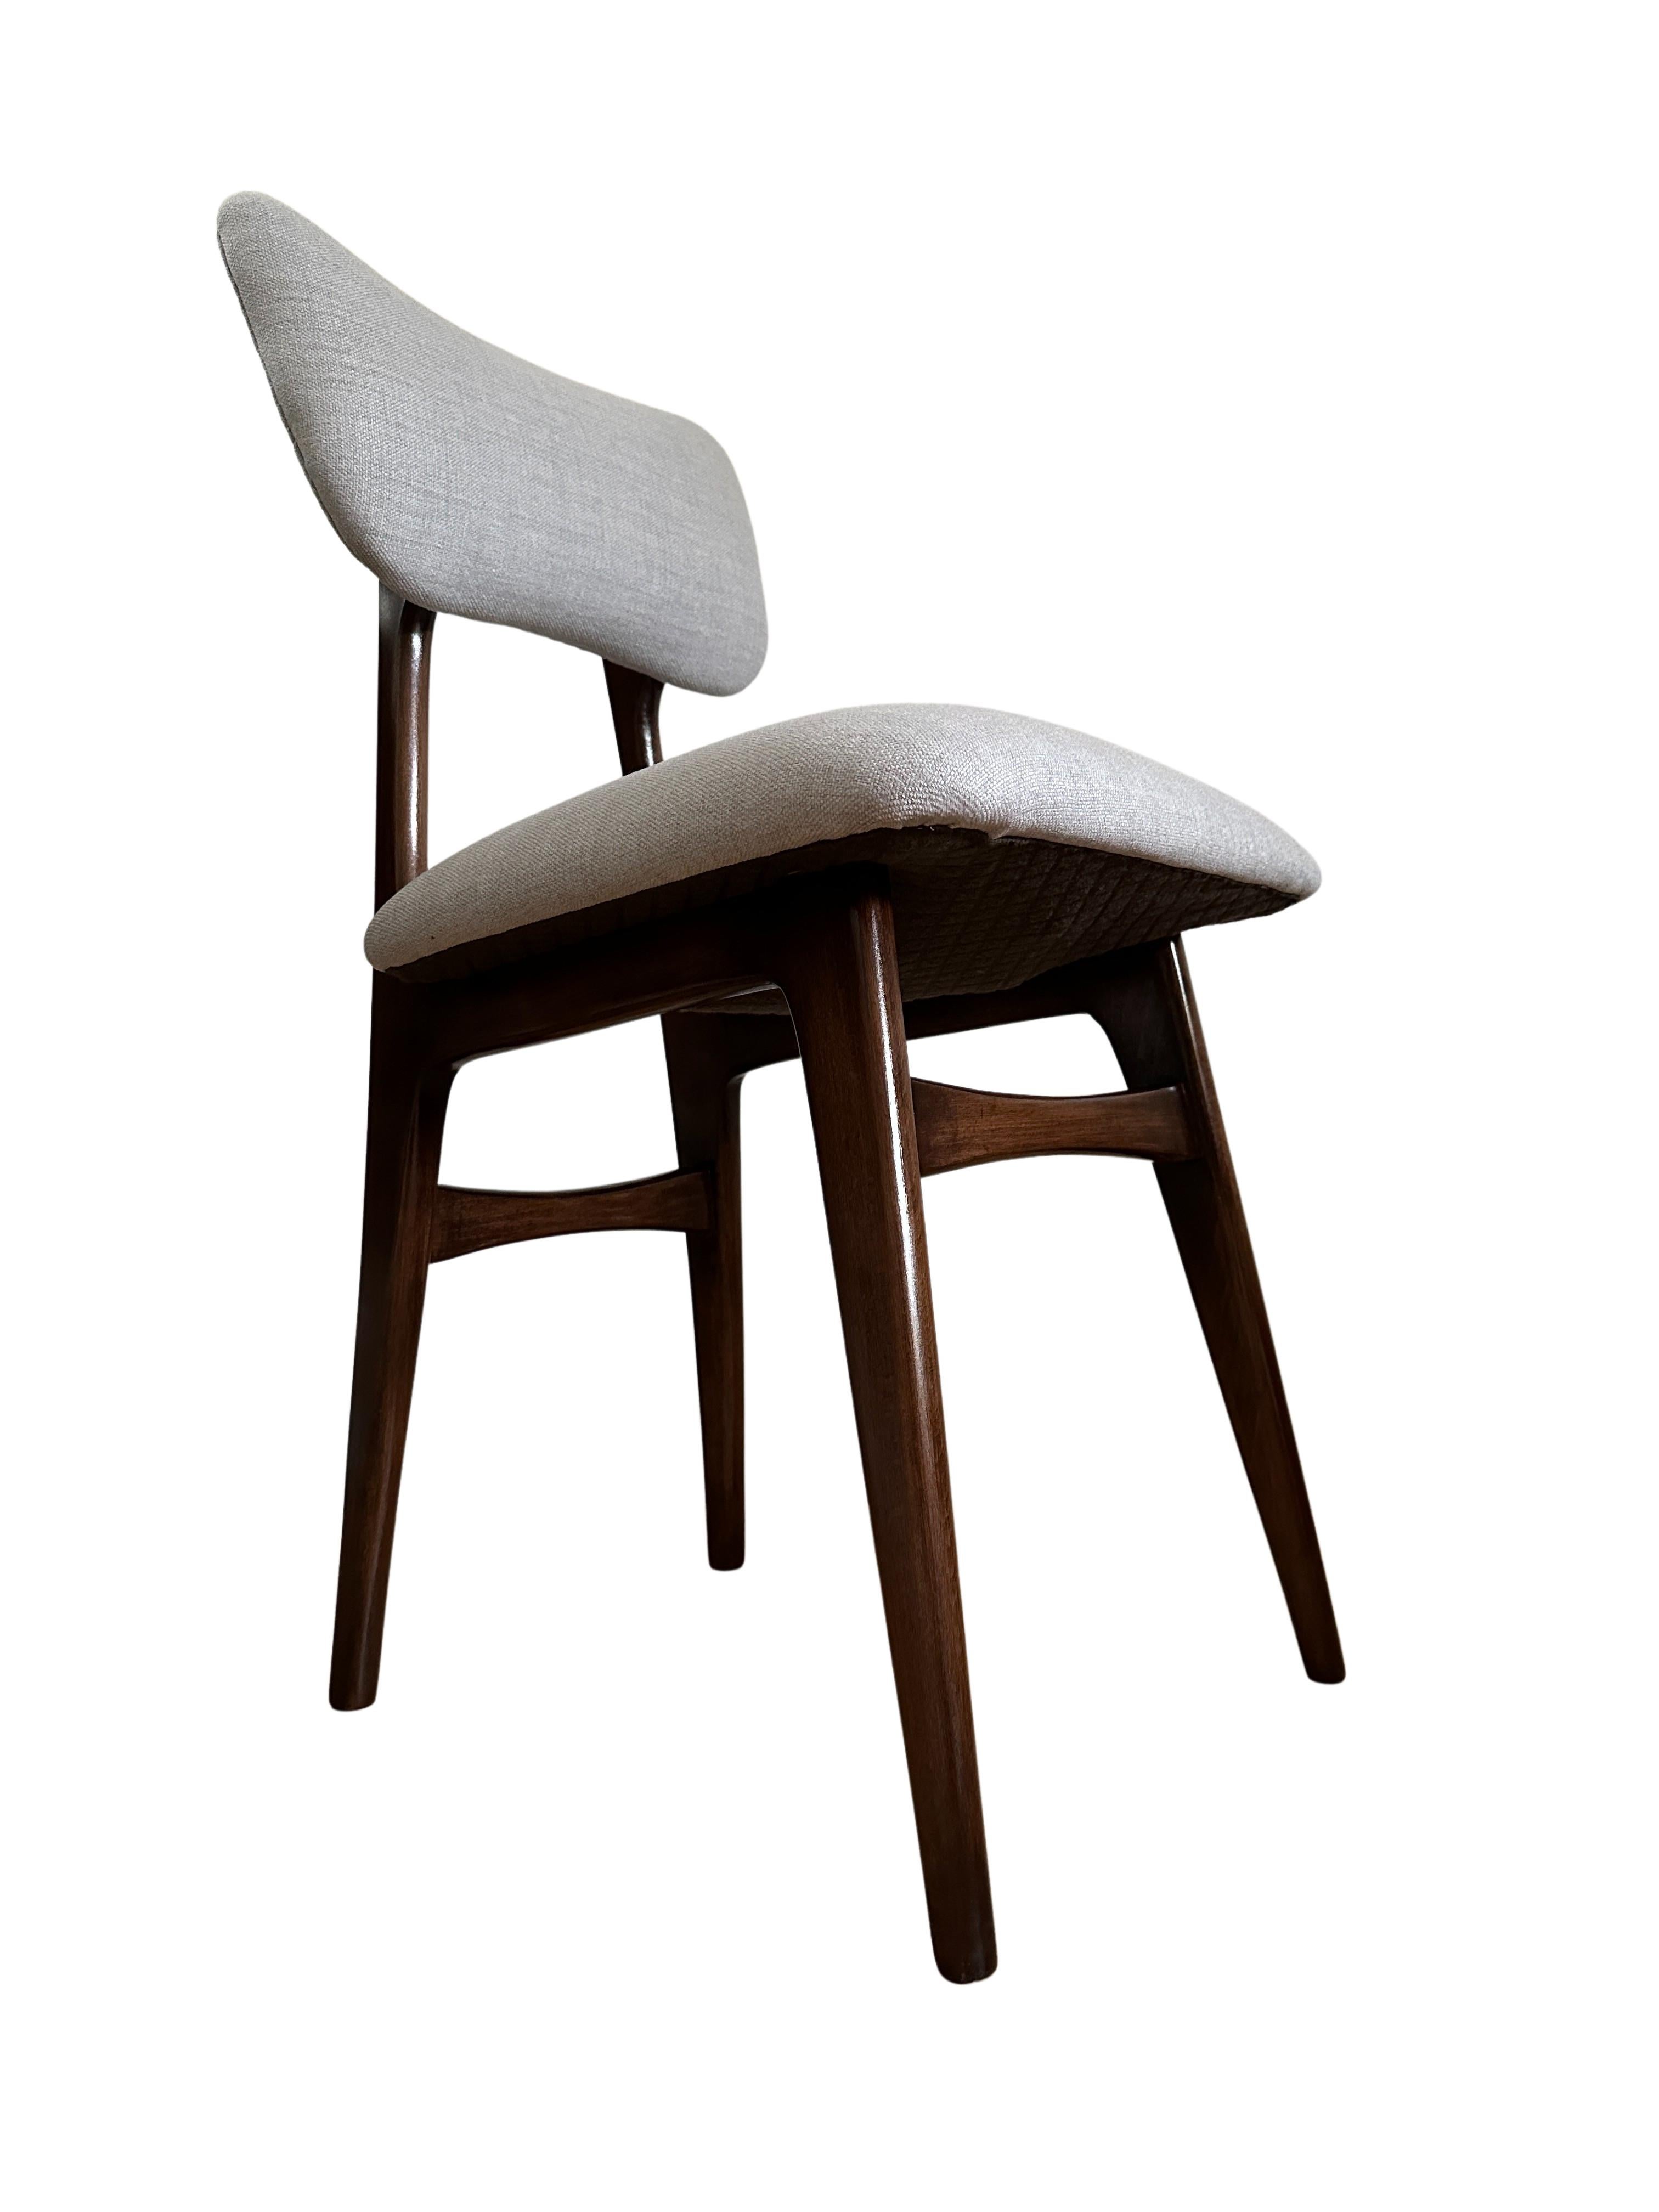 Set of 6 Midcentury Beige and Grey Dining Chairs, Europe, 1960s For Sale 4